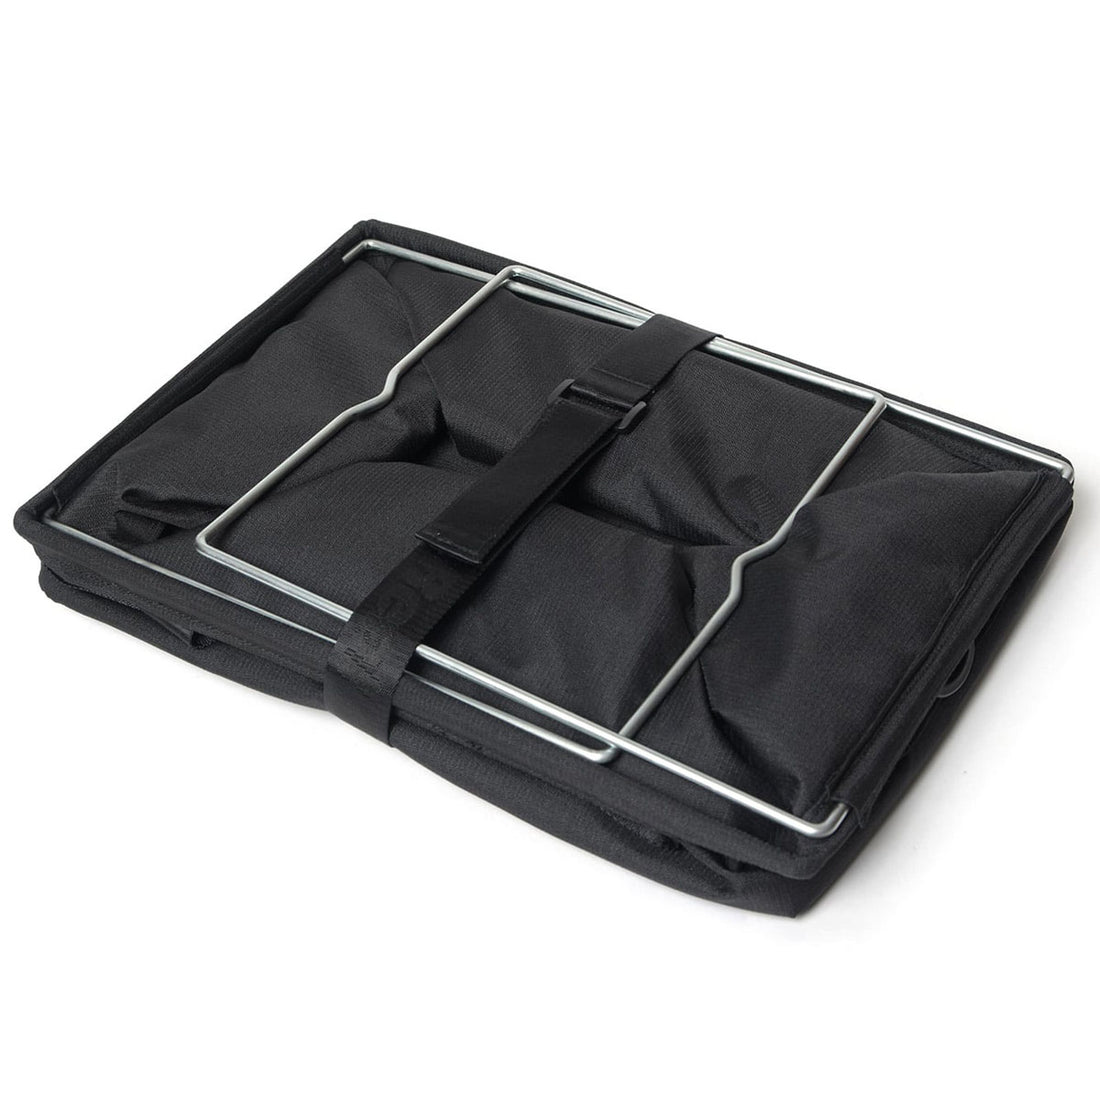 [F.C.Real Bristol]FOLDING STORAGE SOFT CONTAINER(FCRB-232101)